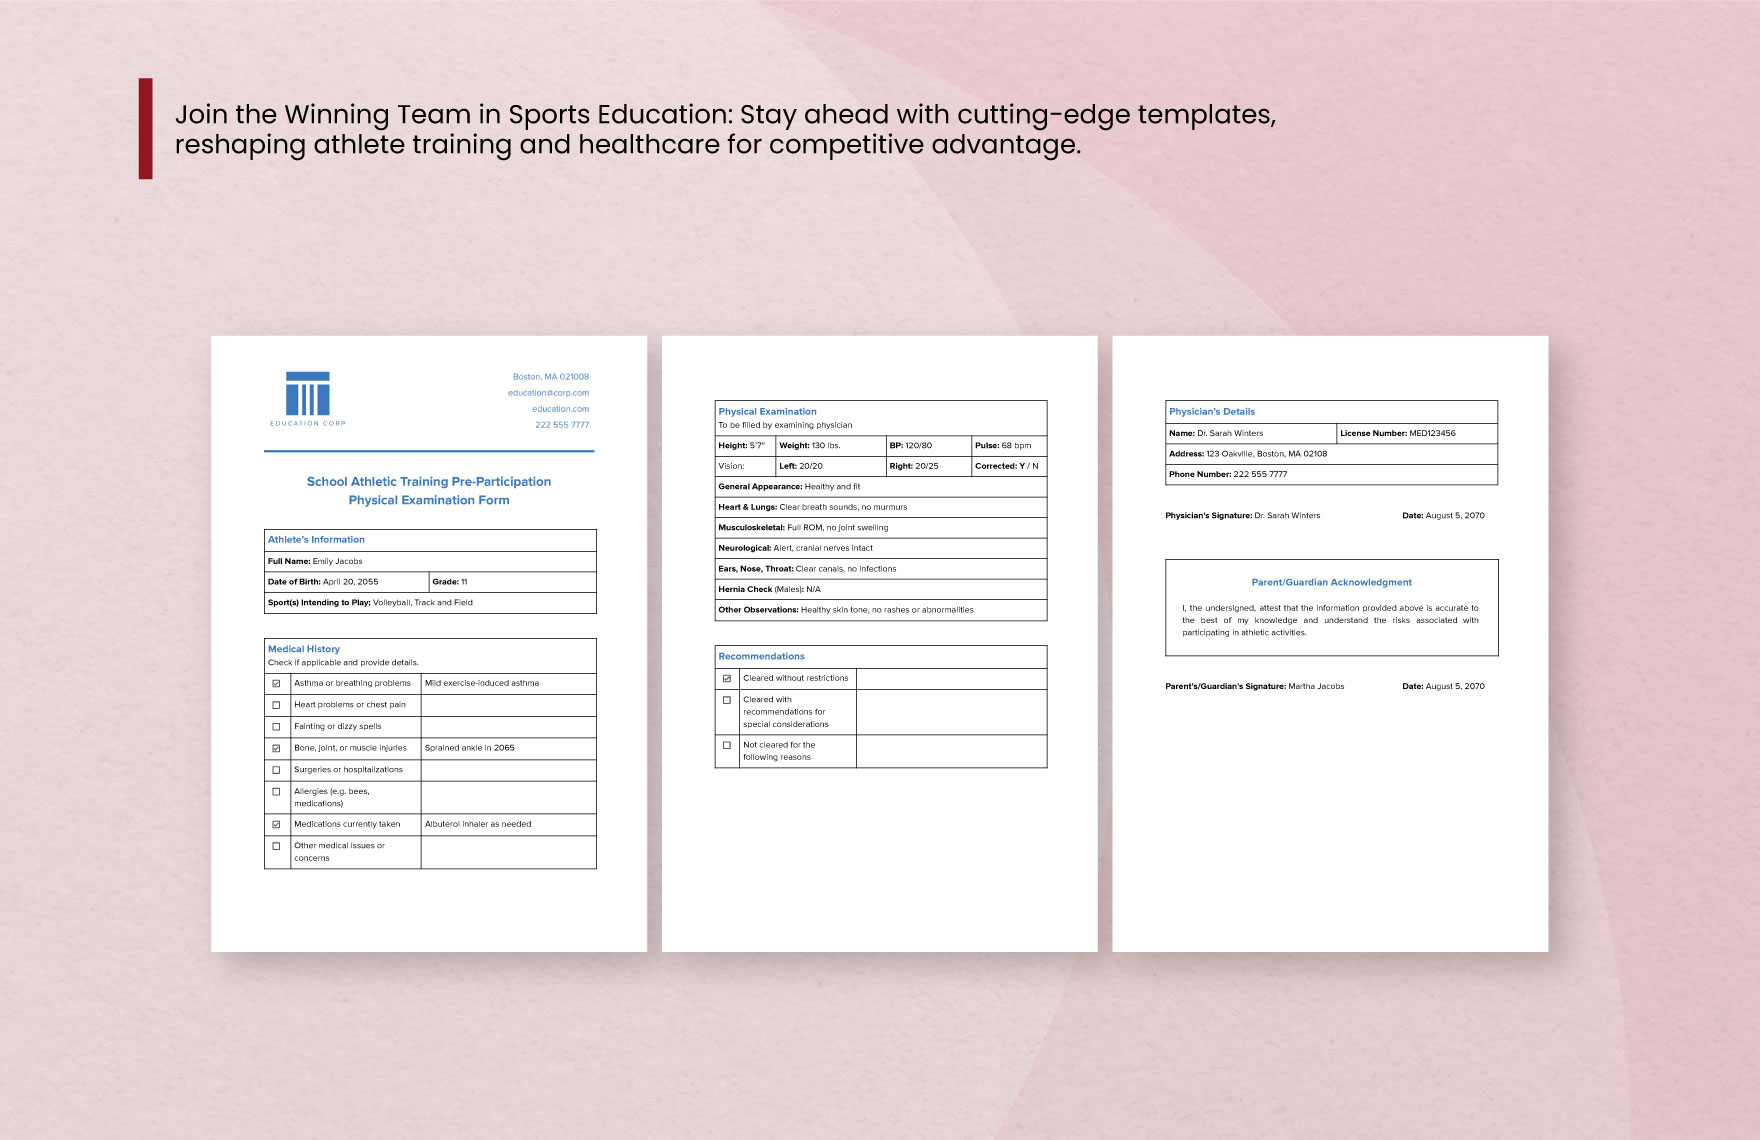 School Athletic Training Pre-Participation Physical Examination Form Template